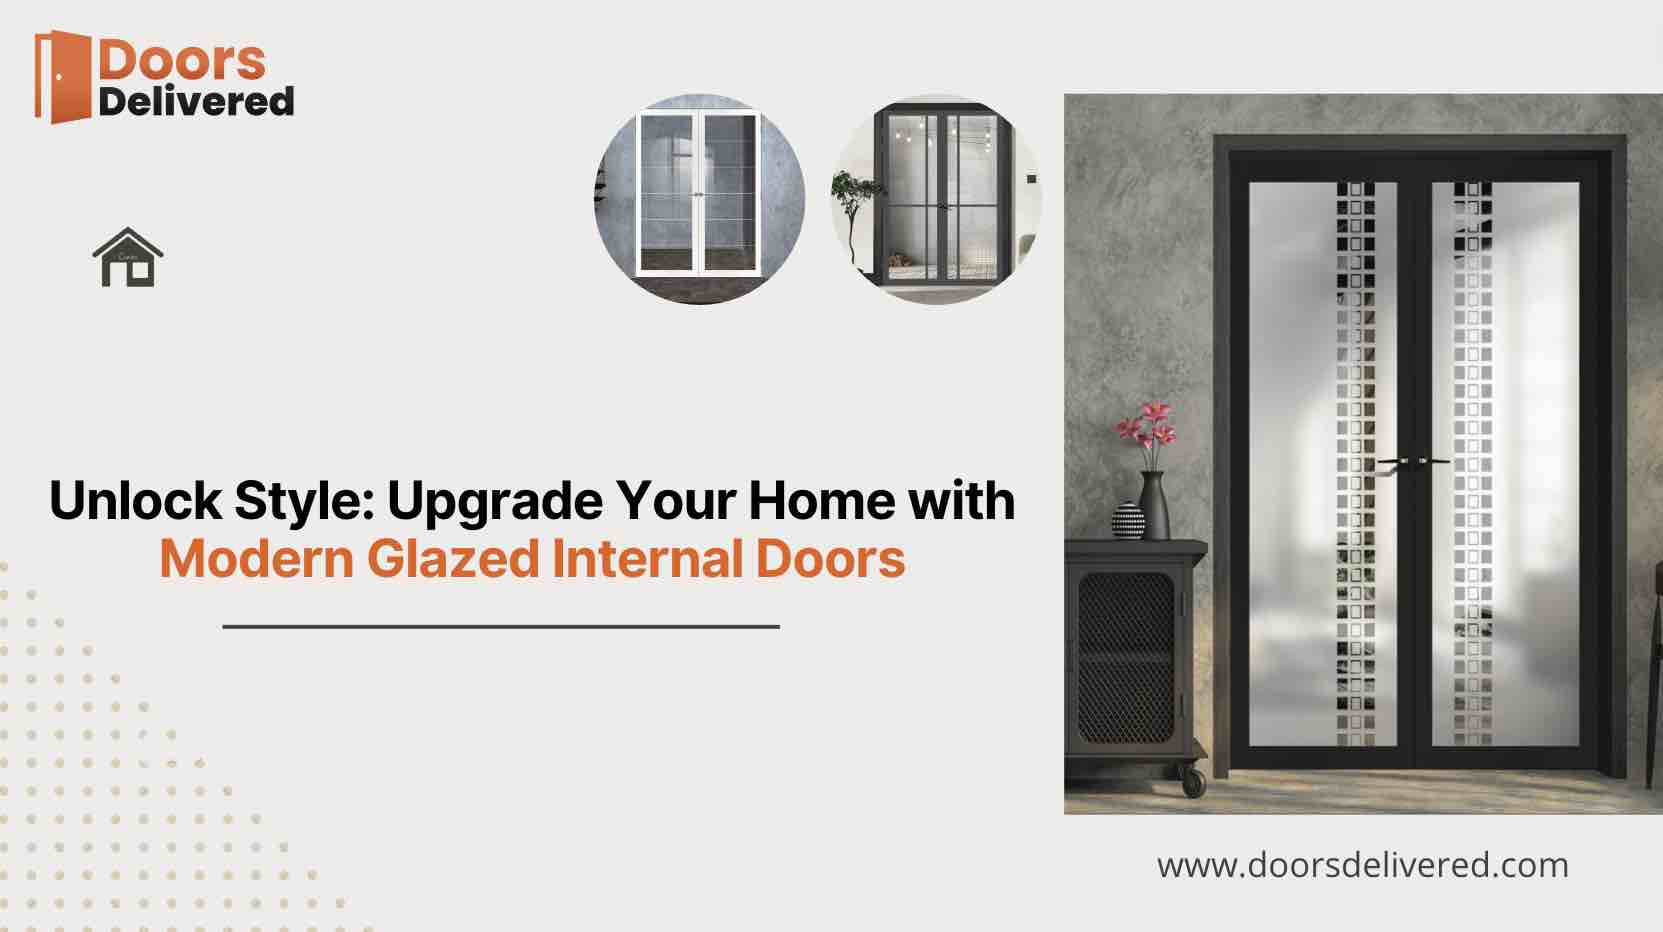 Upgrade Your Home with Modern Glazed Internal Doors